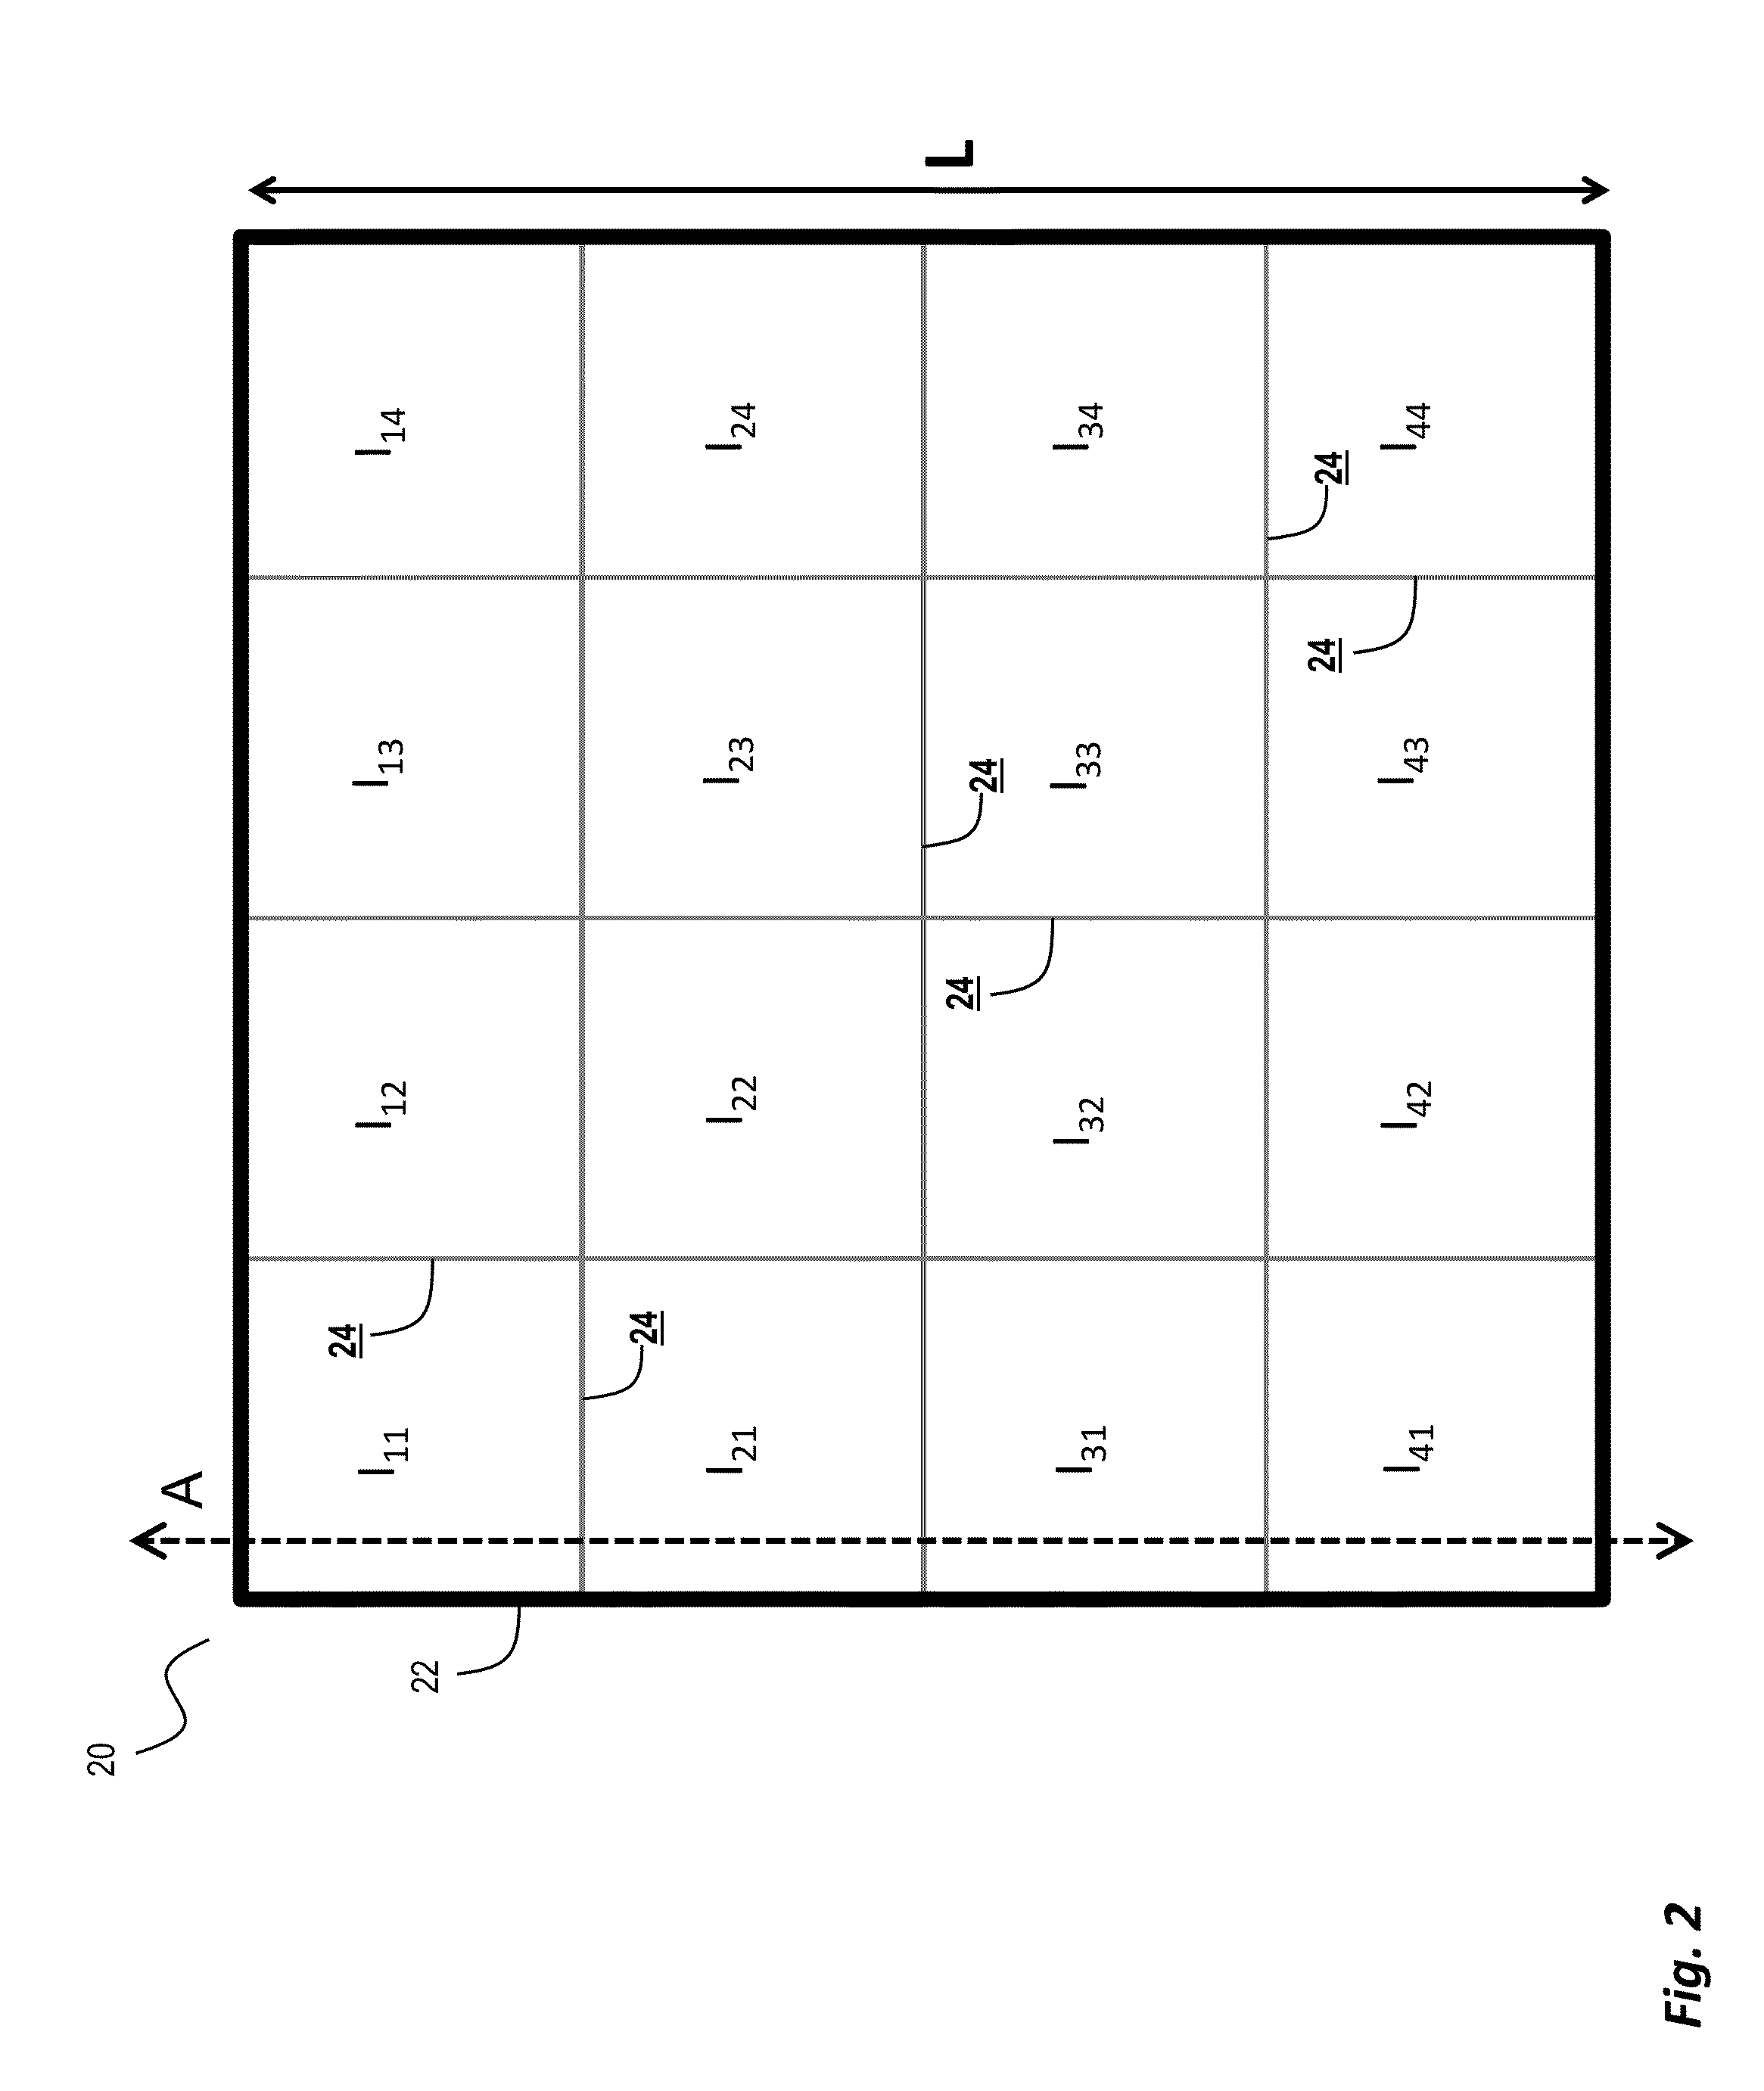 Fabrication methods for monolithically isled back contact back junction solar cells